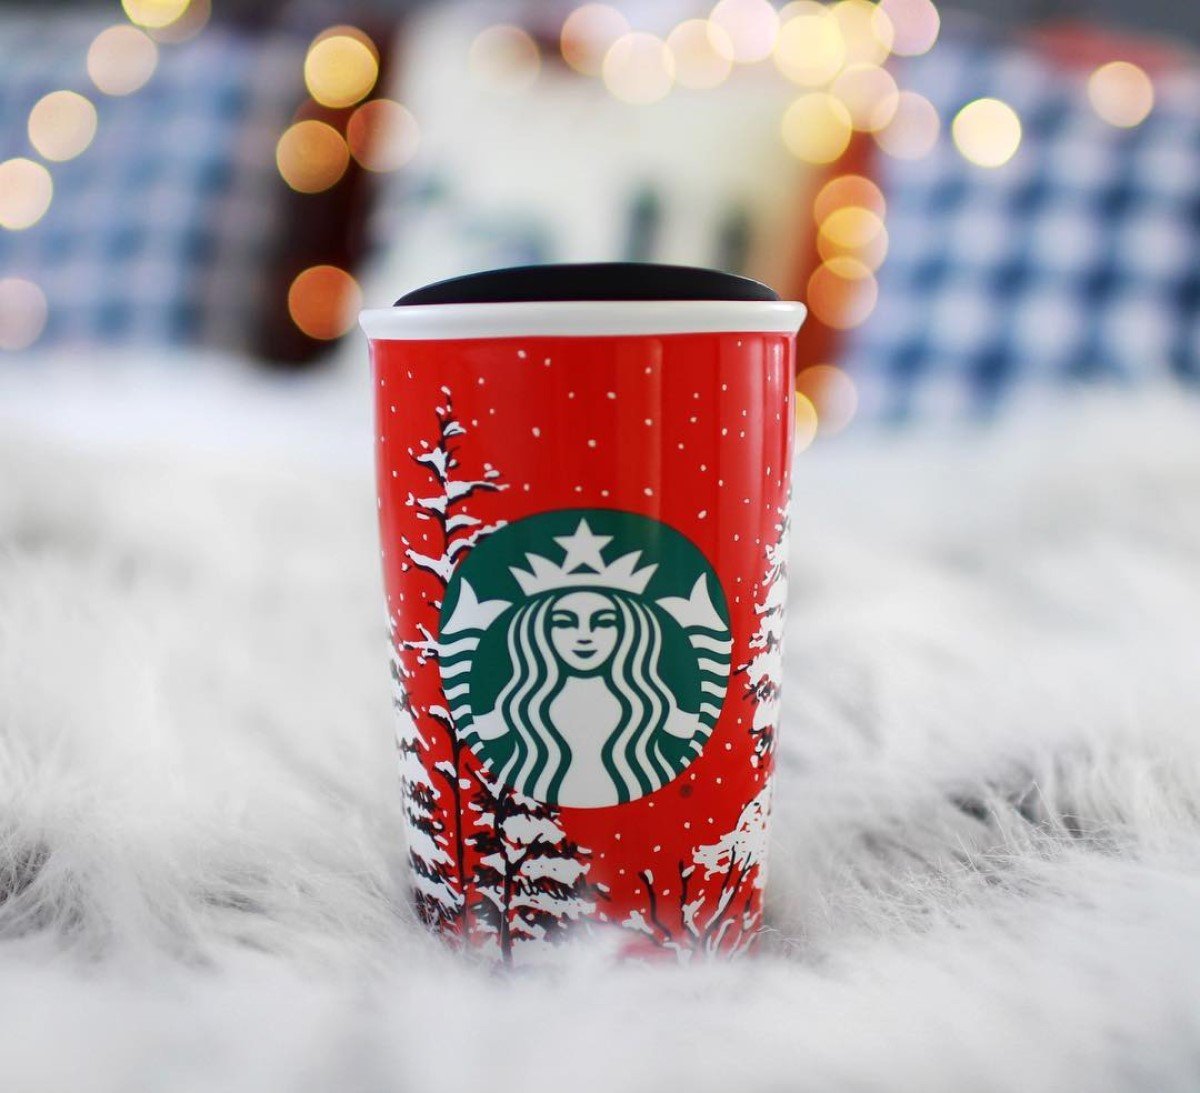 starbucks peppermint mocha latte in red cup on white fur